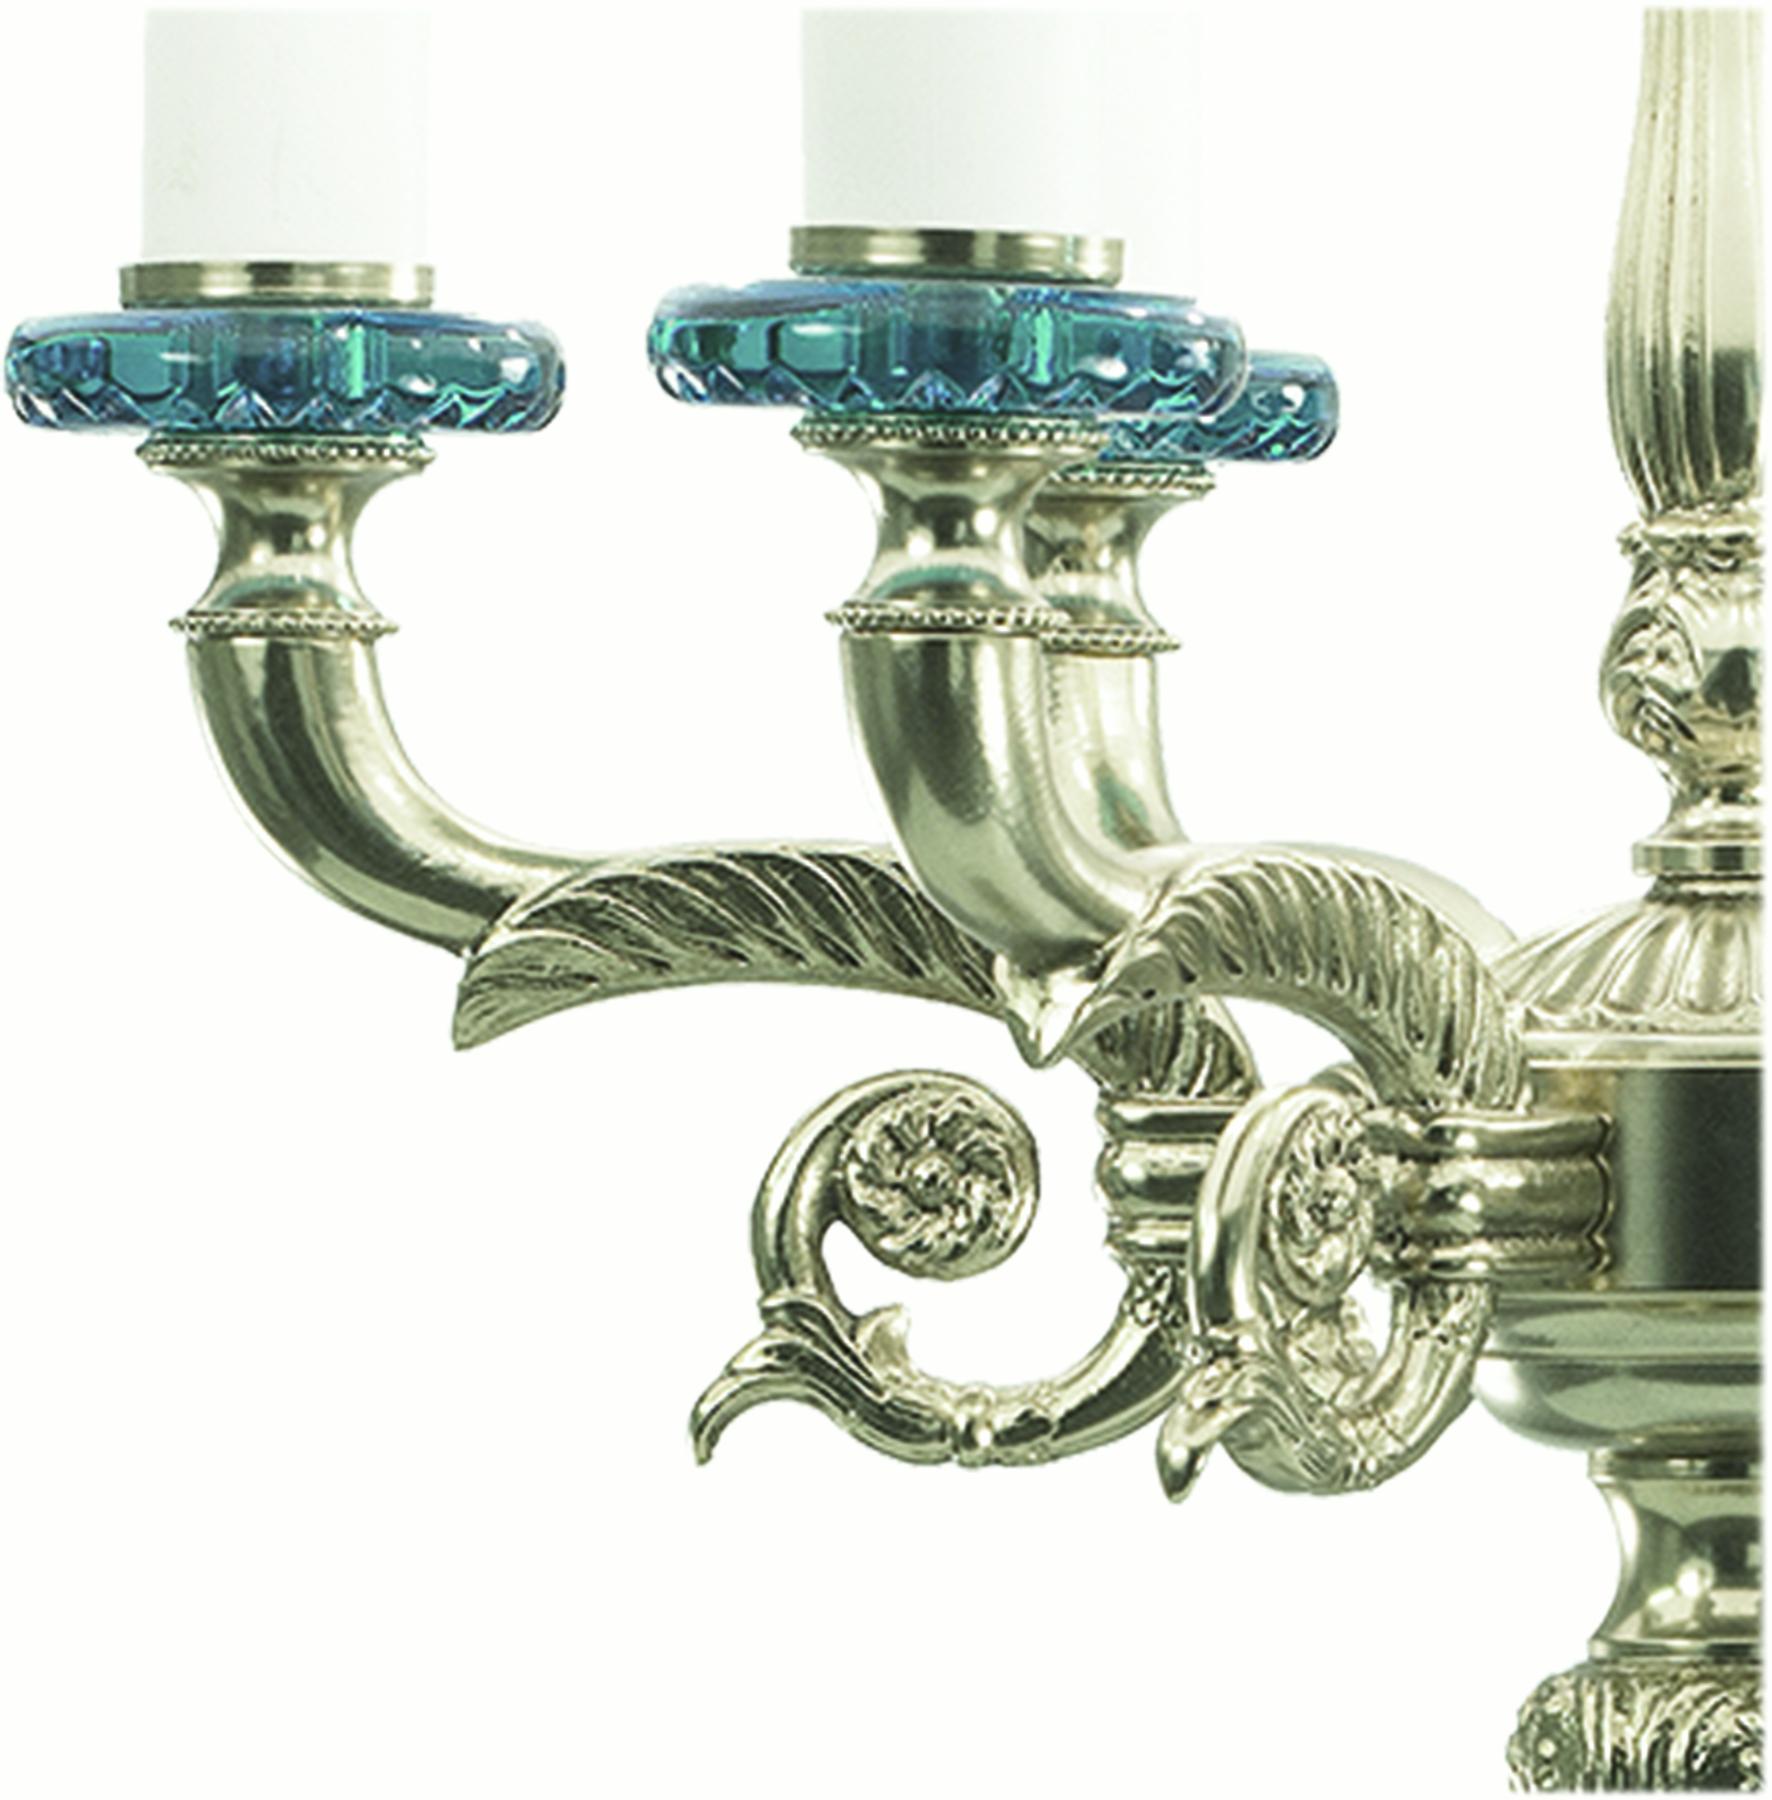 Table lamp with 6 lights in hand-cut clear and turquoise crystal and bronze in patinated silver. Each object is handcrafted and the care for every detail makes each item unique in its kind.
The style of this table lamp  is a modern reinterpretation